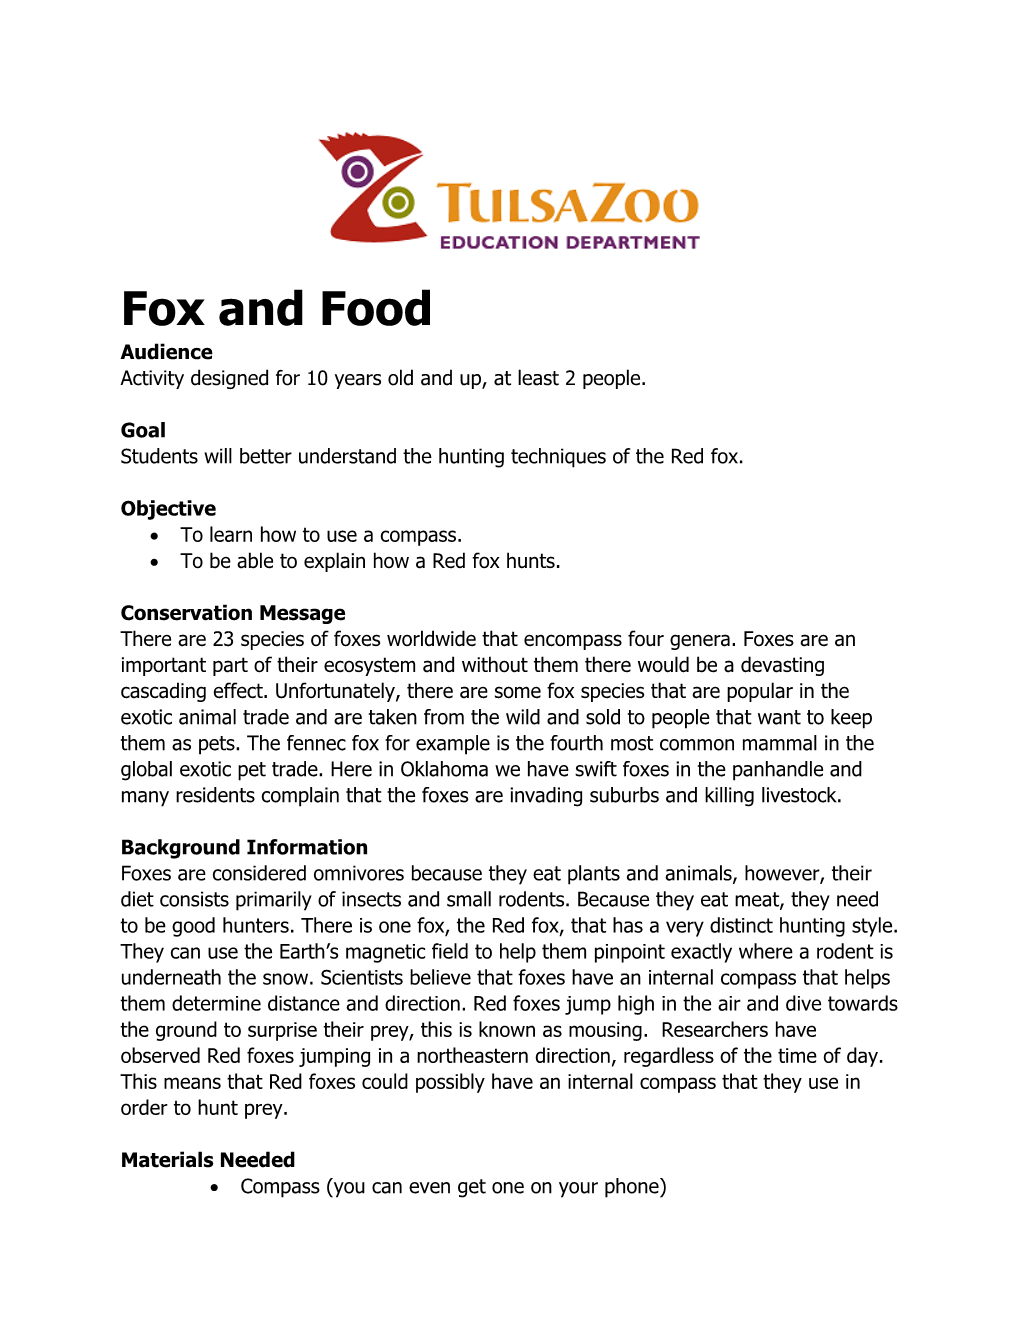 Fox and Food Audience Activity Designed for 10 Years Old and Up, at Least 2 People